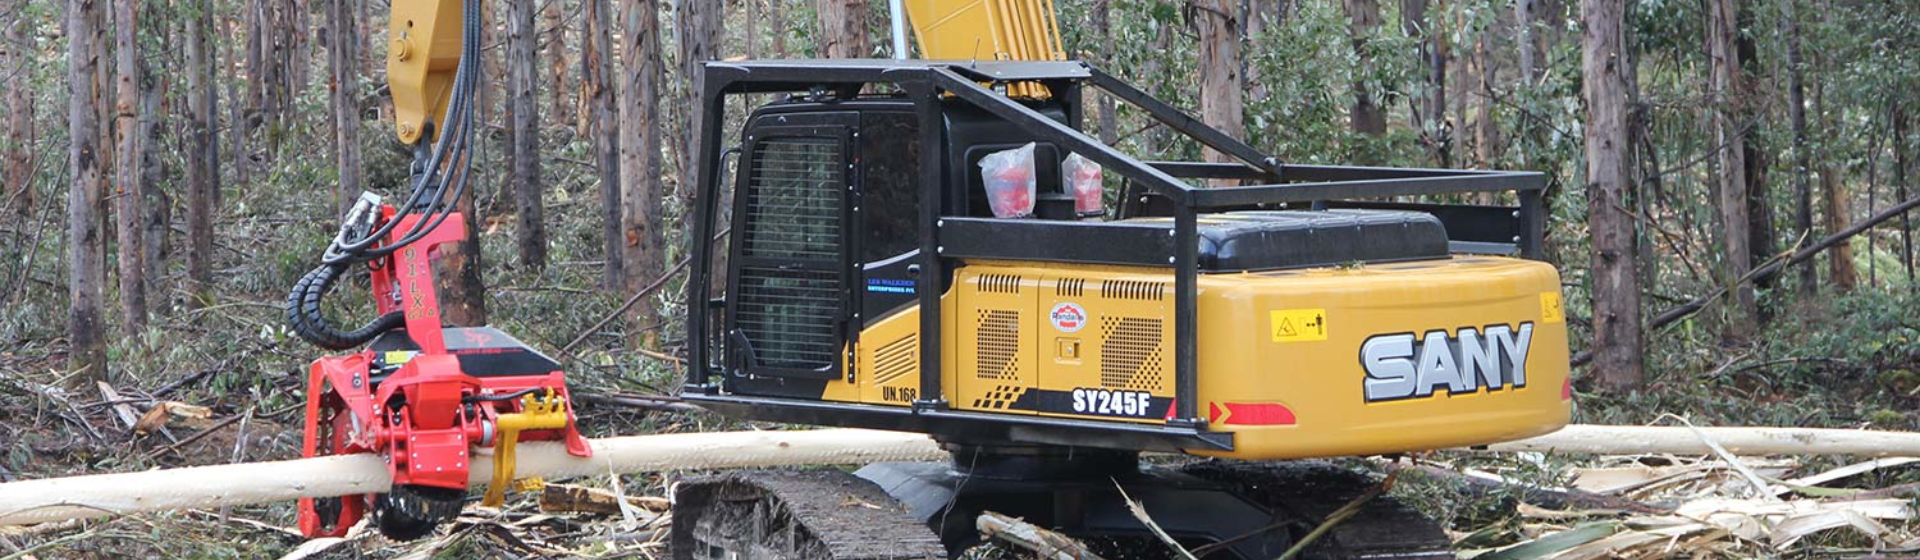 FOREST FEARS SANY EXCAVATOR EFFICIENCY